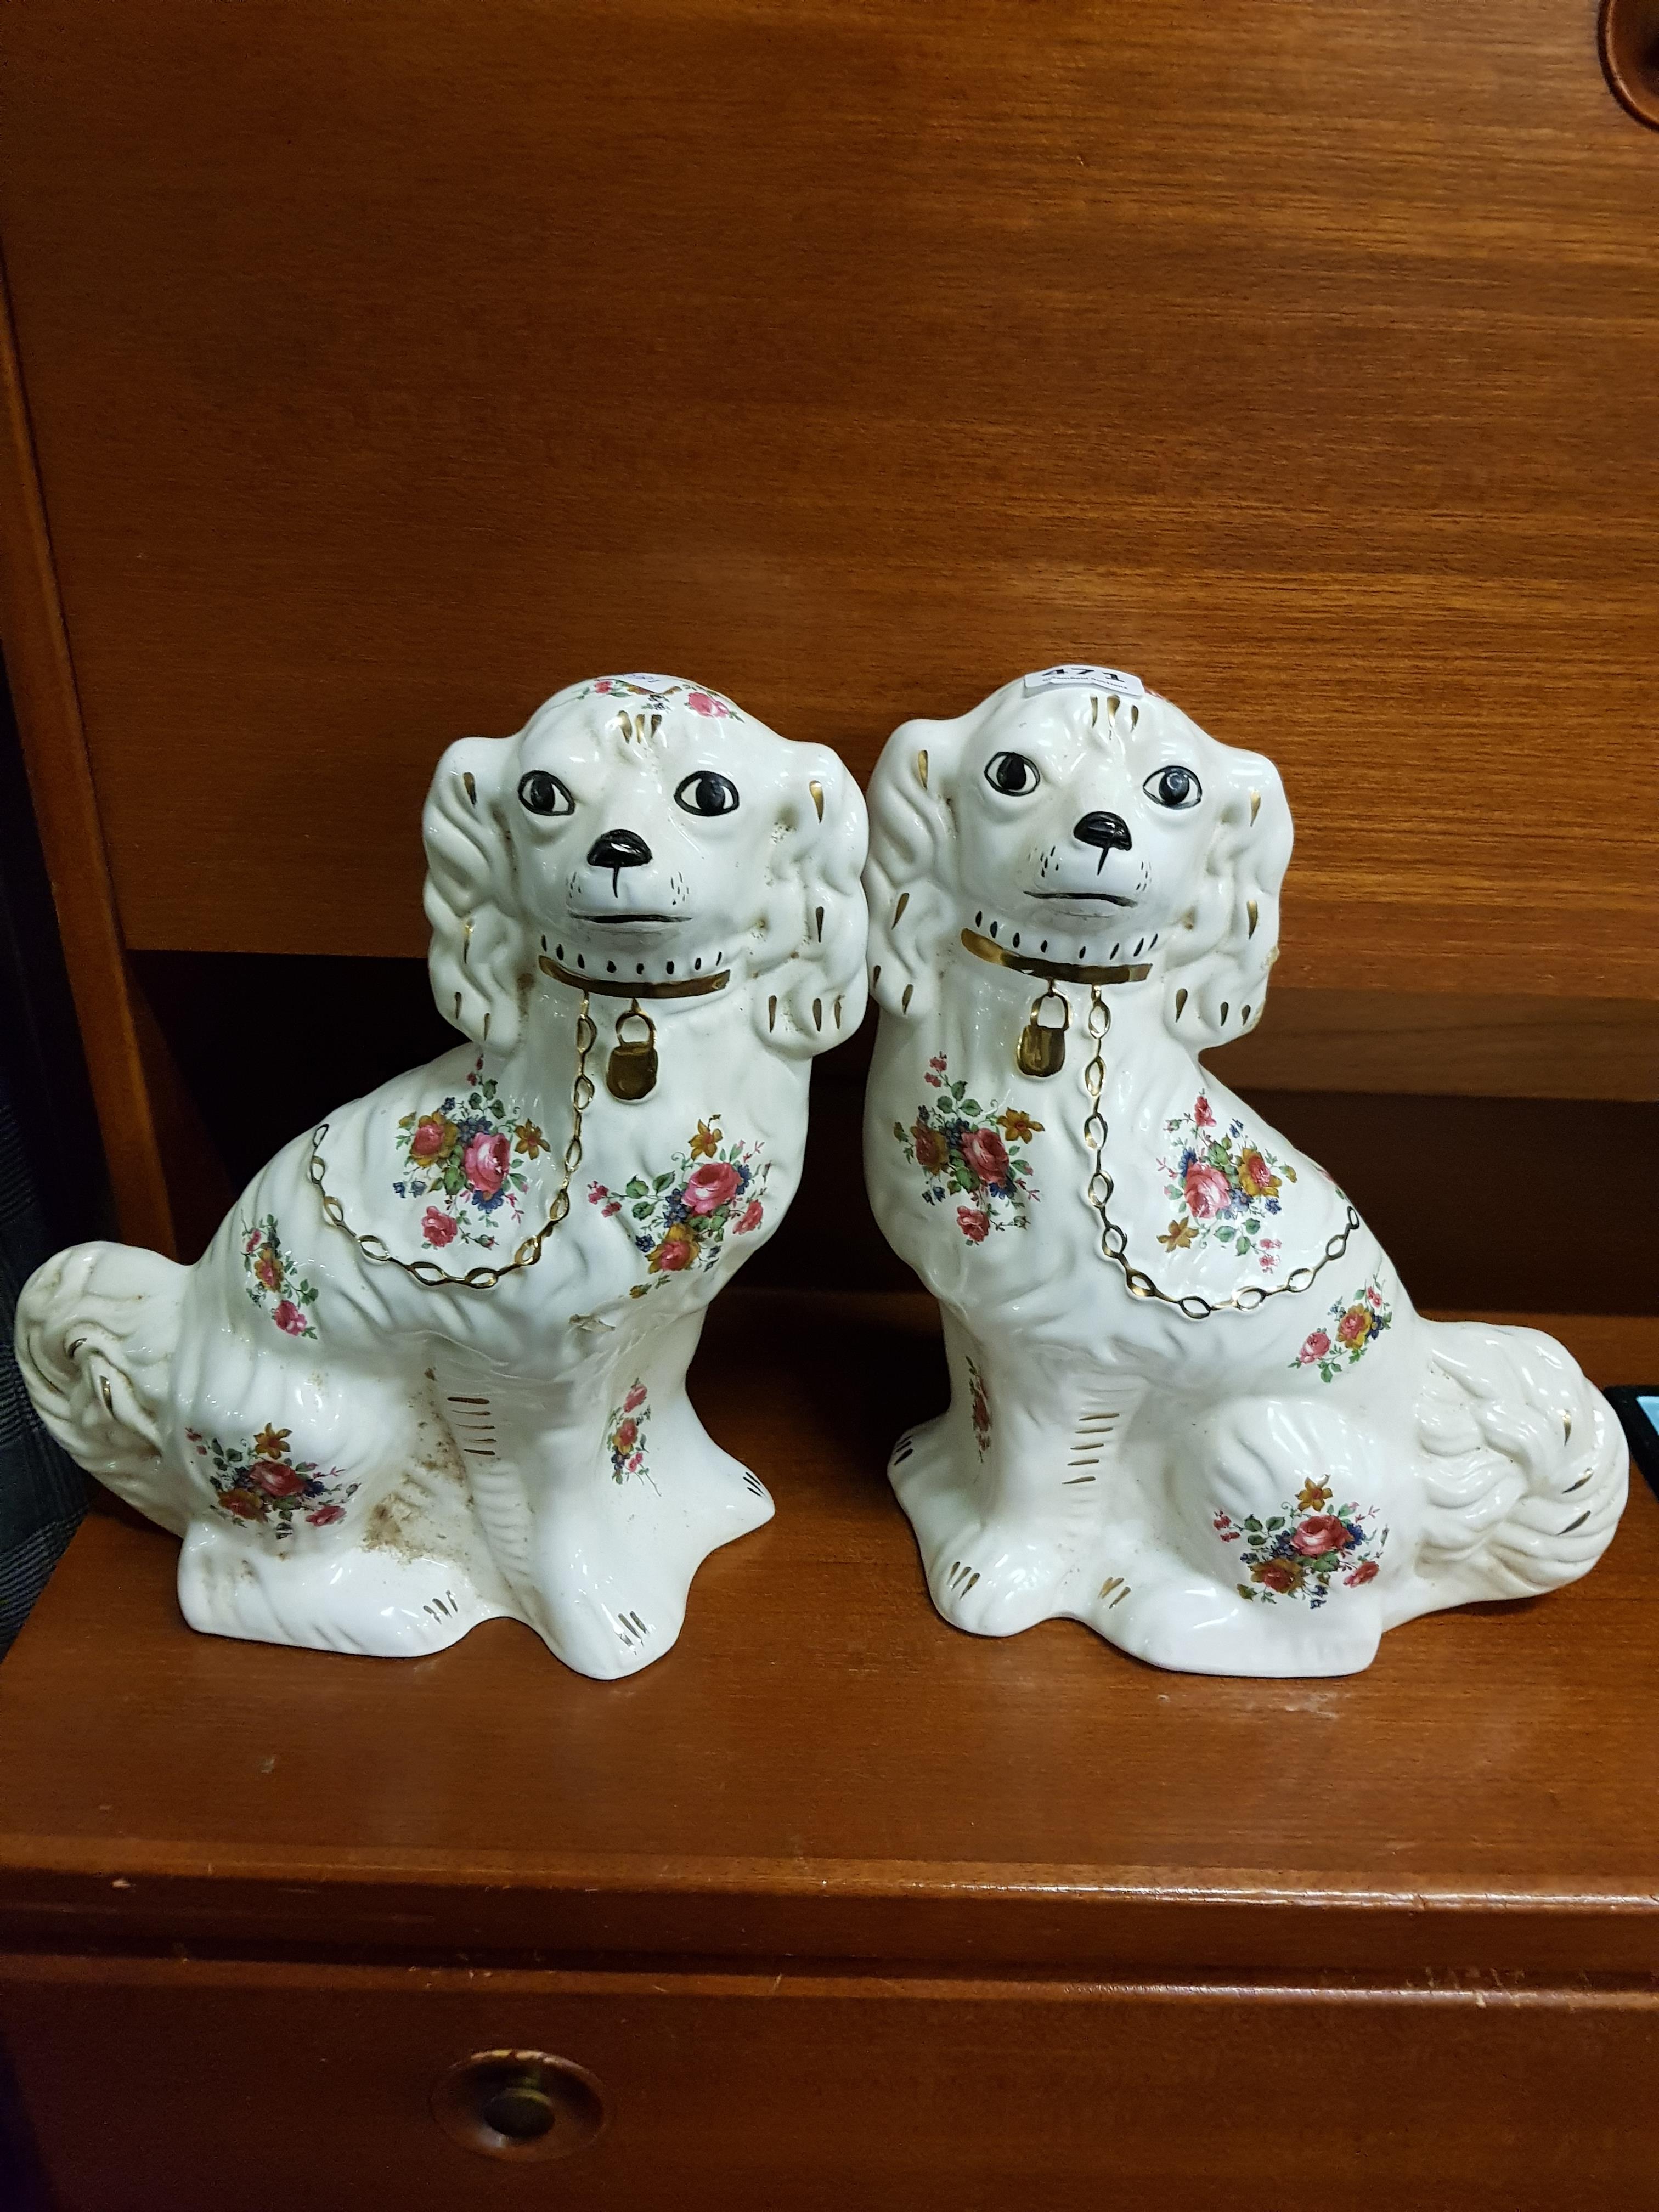 PAIR OF DOG FIGURES